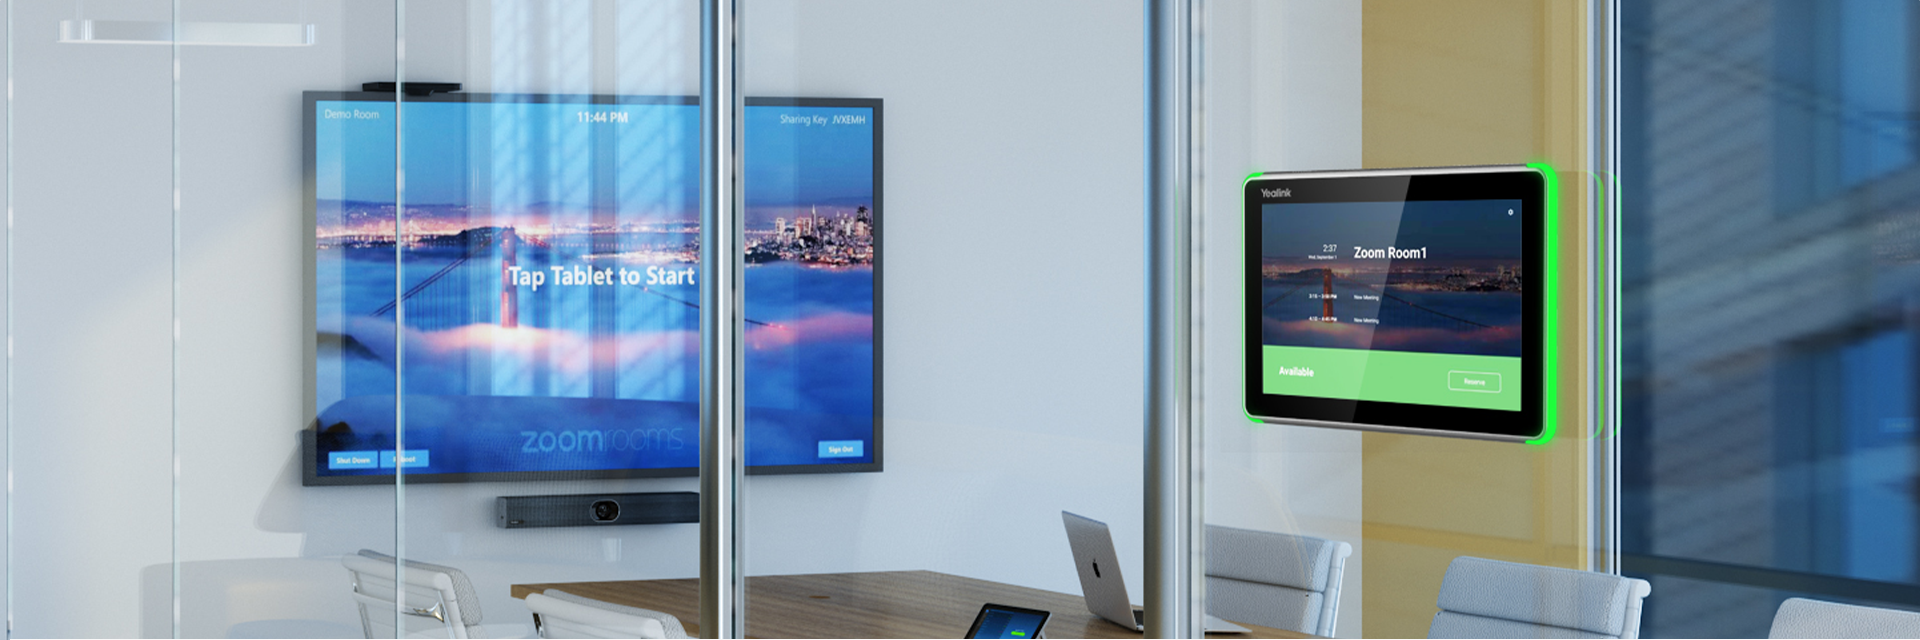 touchscreen monitors in meeting spaces